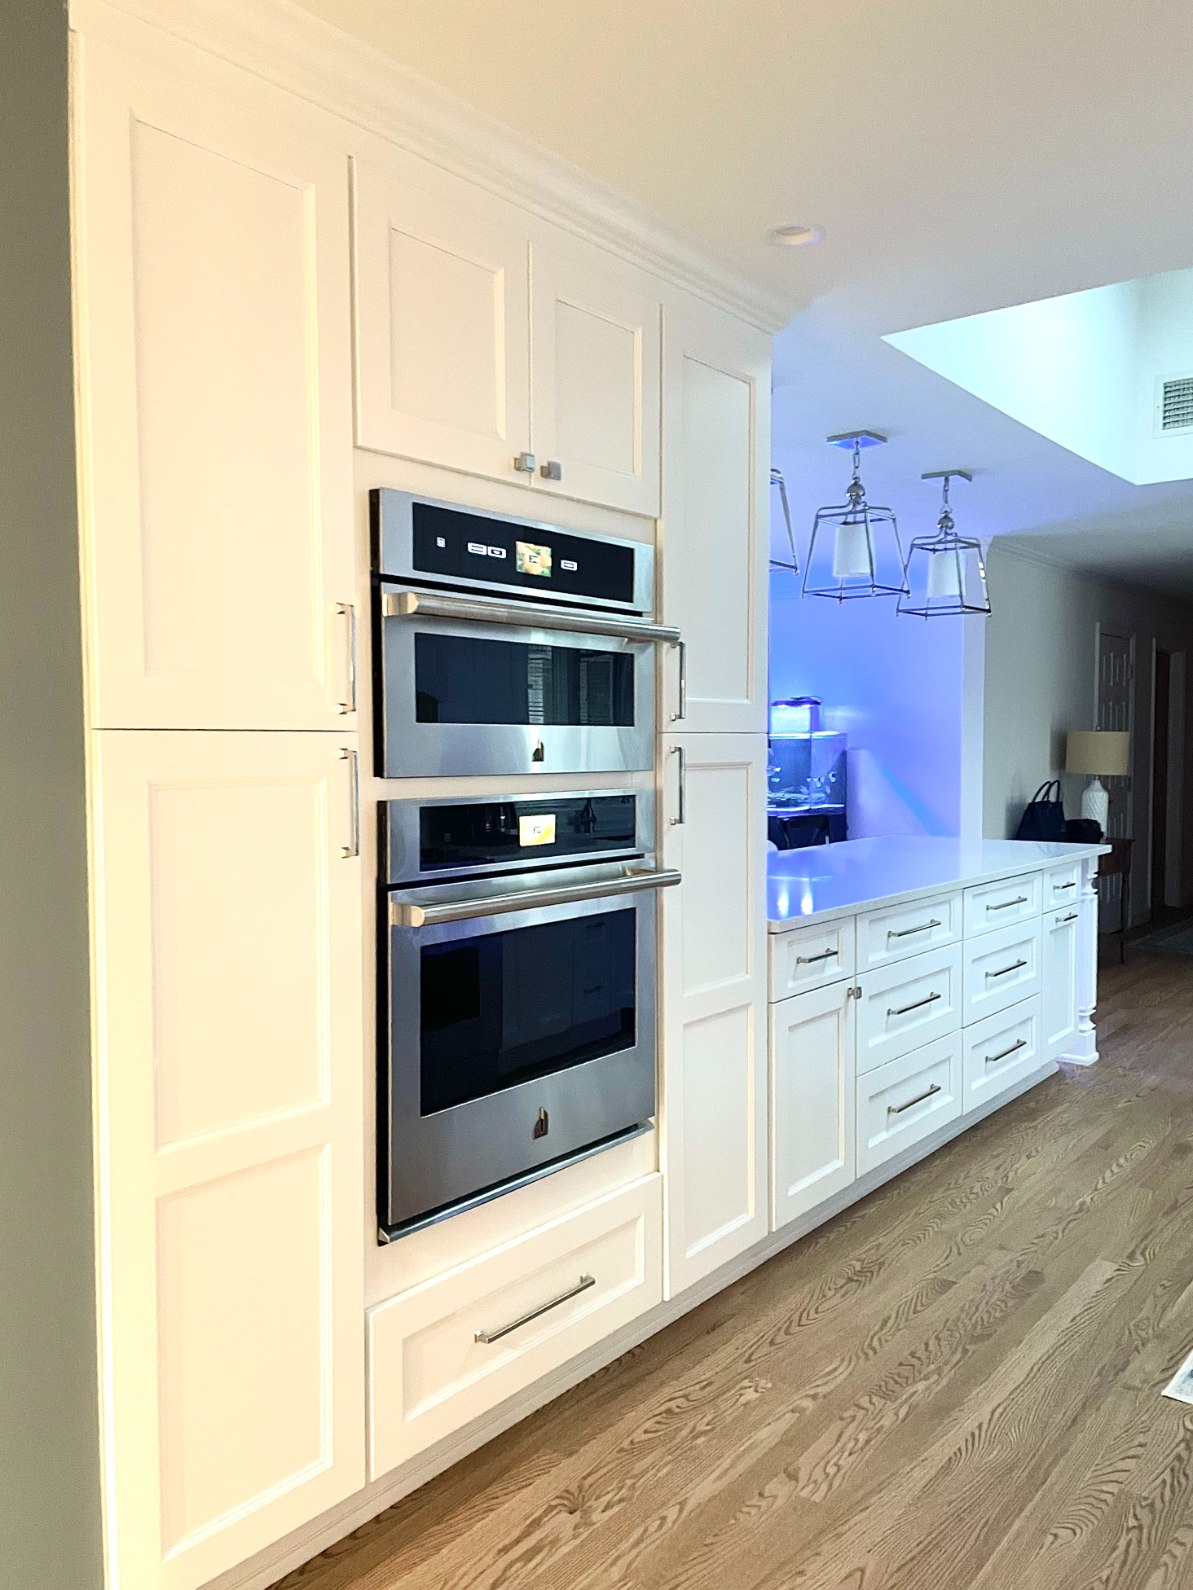 White shaker cabinets around double oven in Islip, NY kitchen remodel by Kuhn Construction